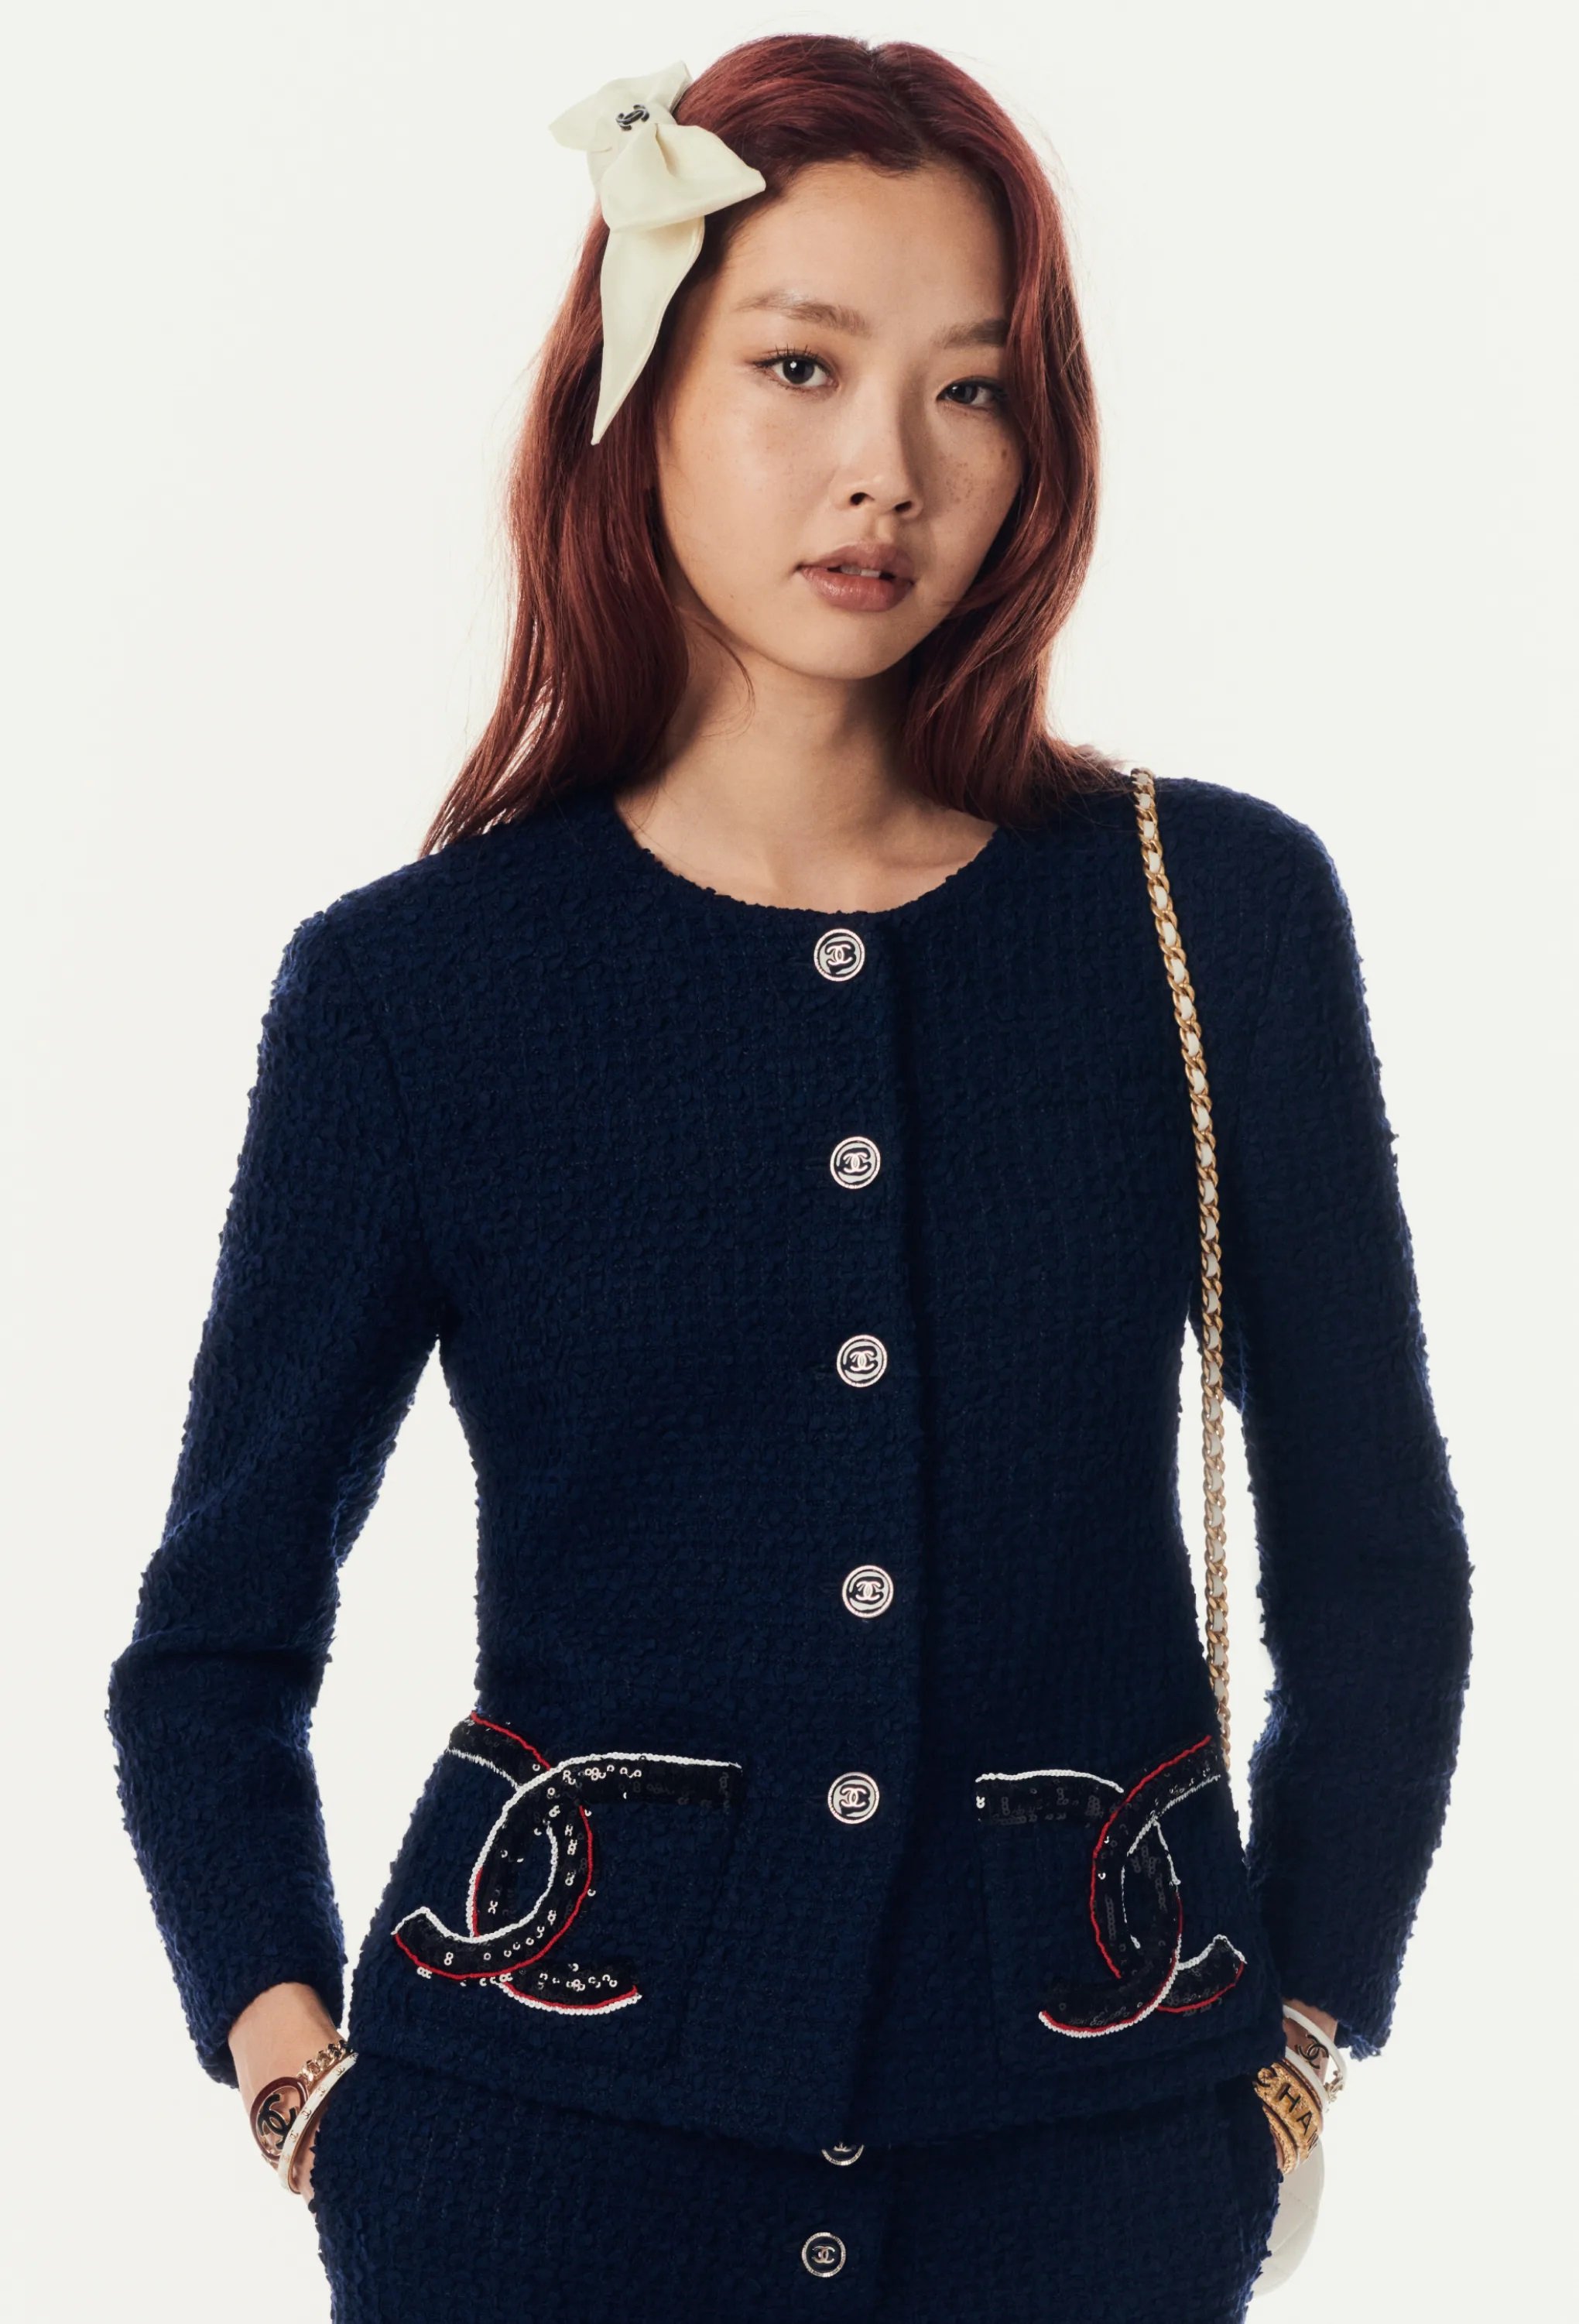 Chanel Embroidered Glittered Tweed Jacket in NavyWhiteRed.jpg